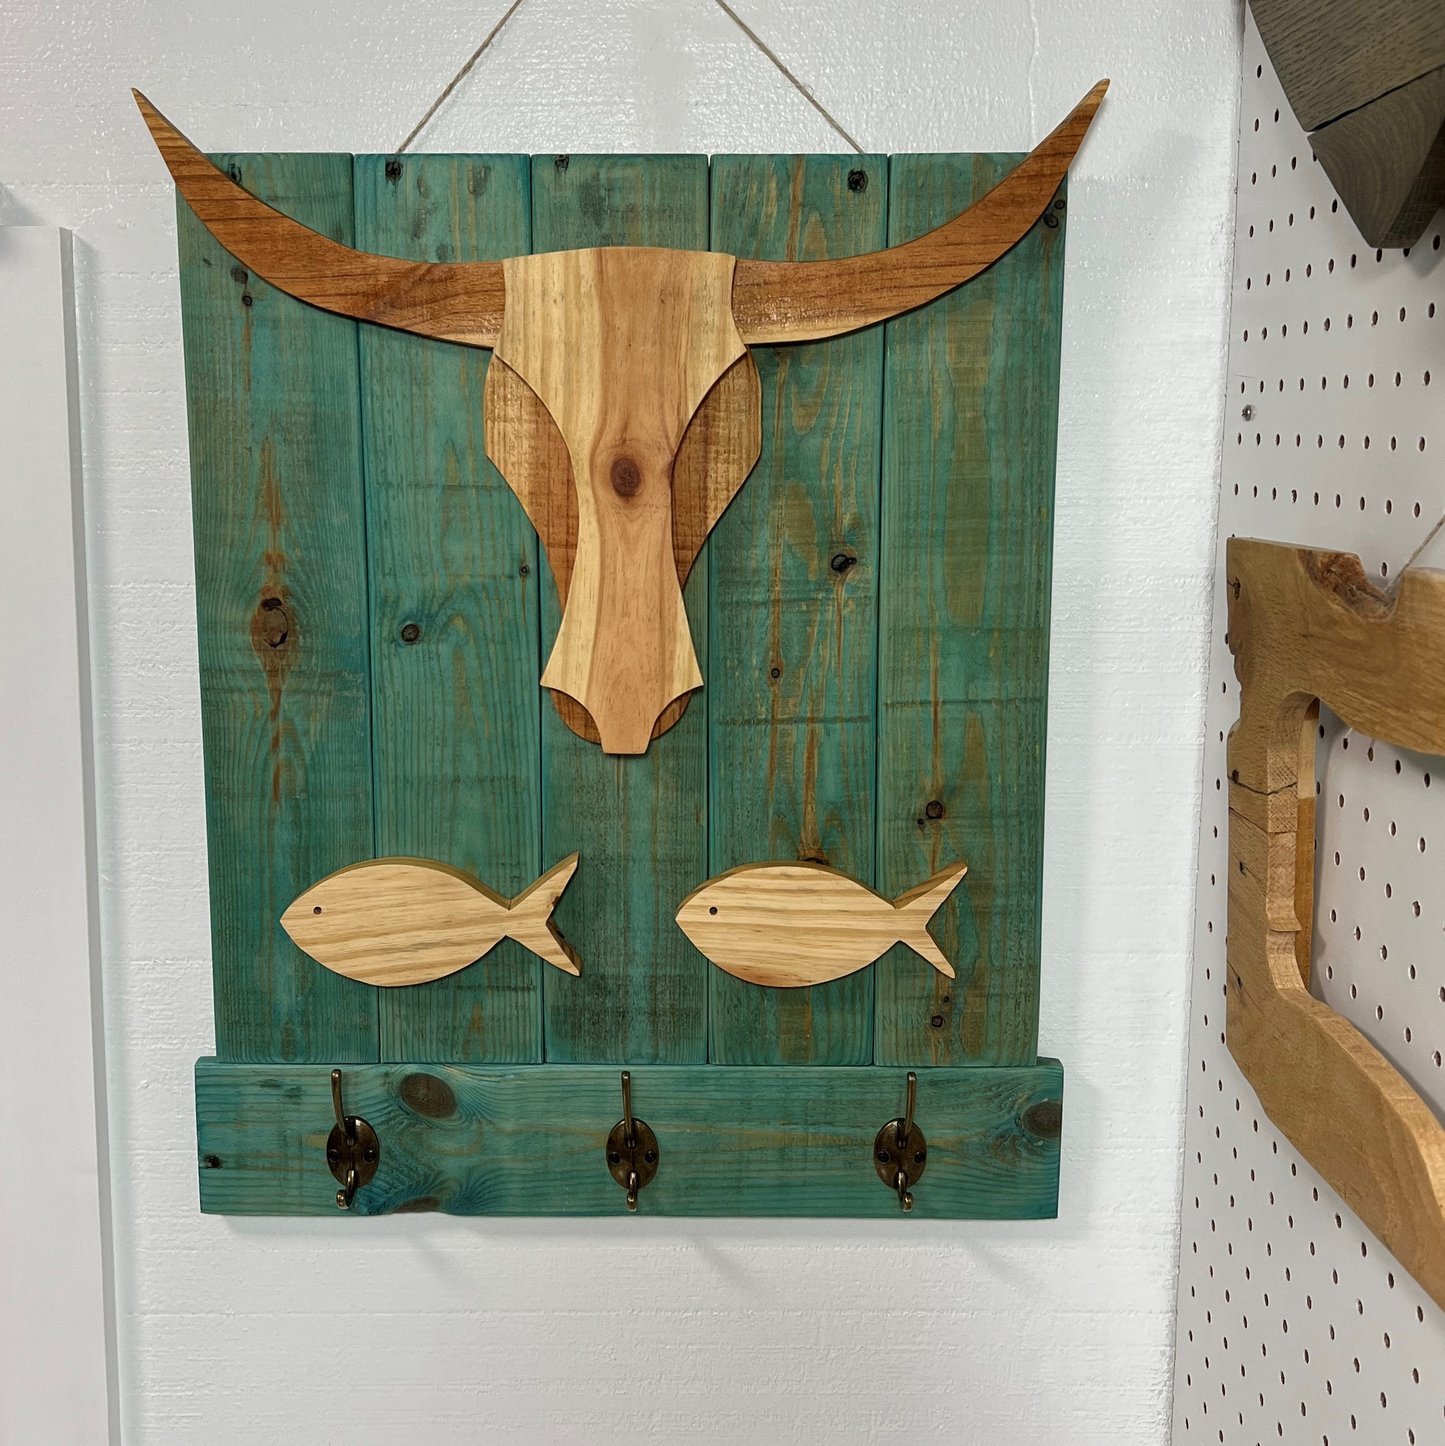 Wooden Bull's Head and Fish Pallet Sign with Coat Hangers